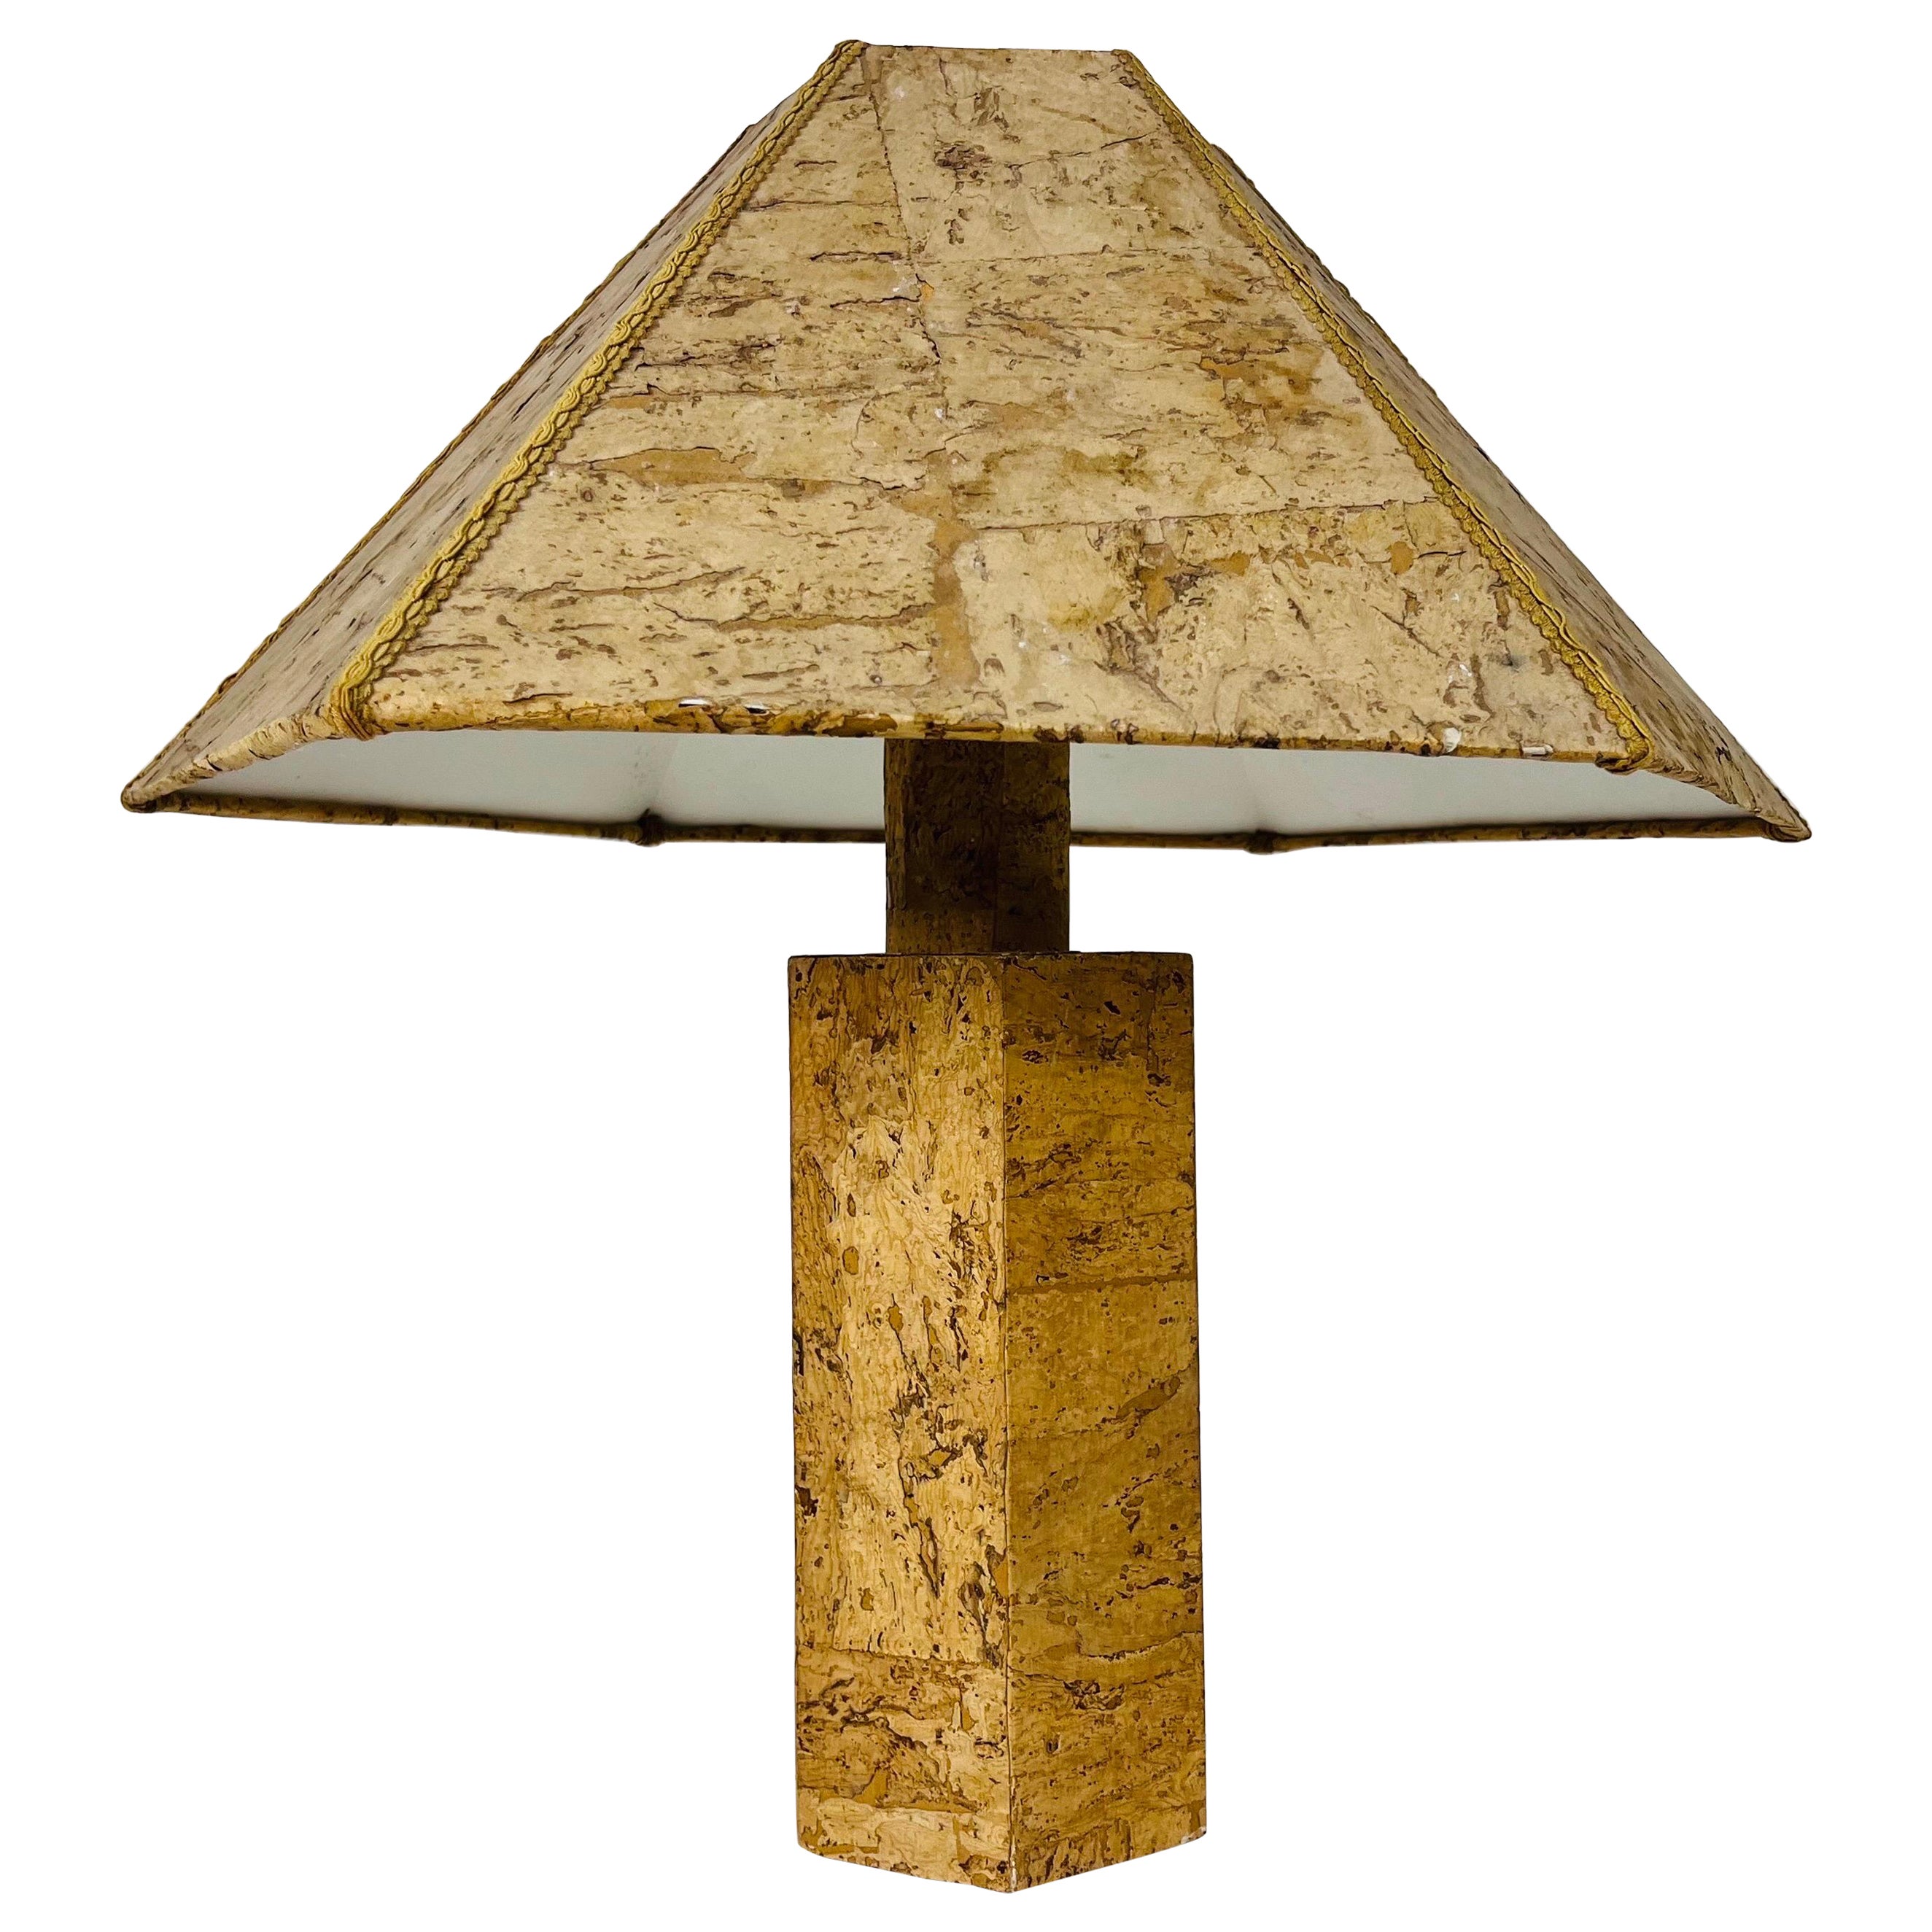 German Cork Table Lamp in the Style of Ingo Maurer, 1960s, Germany